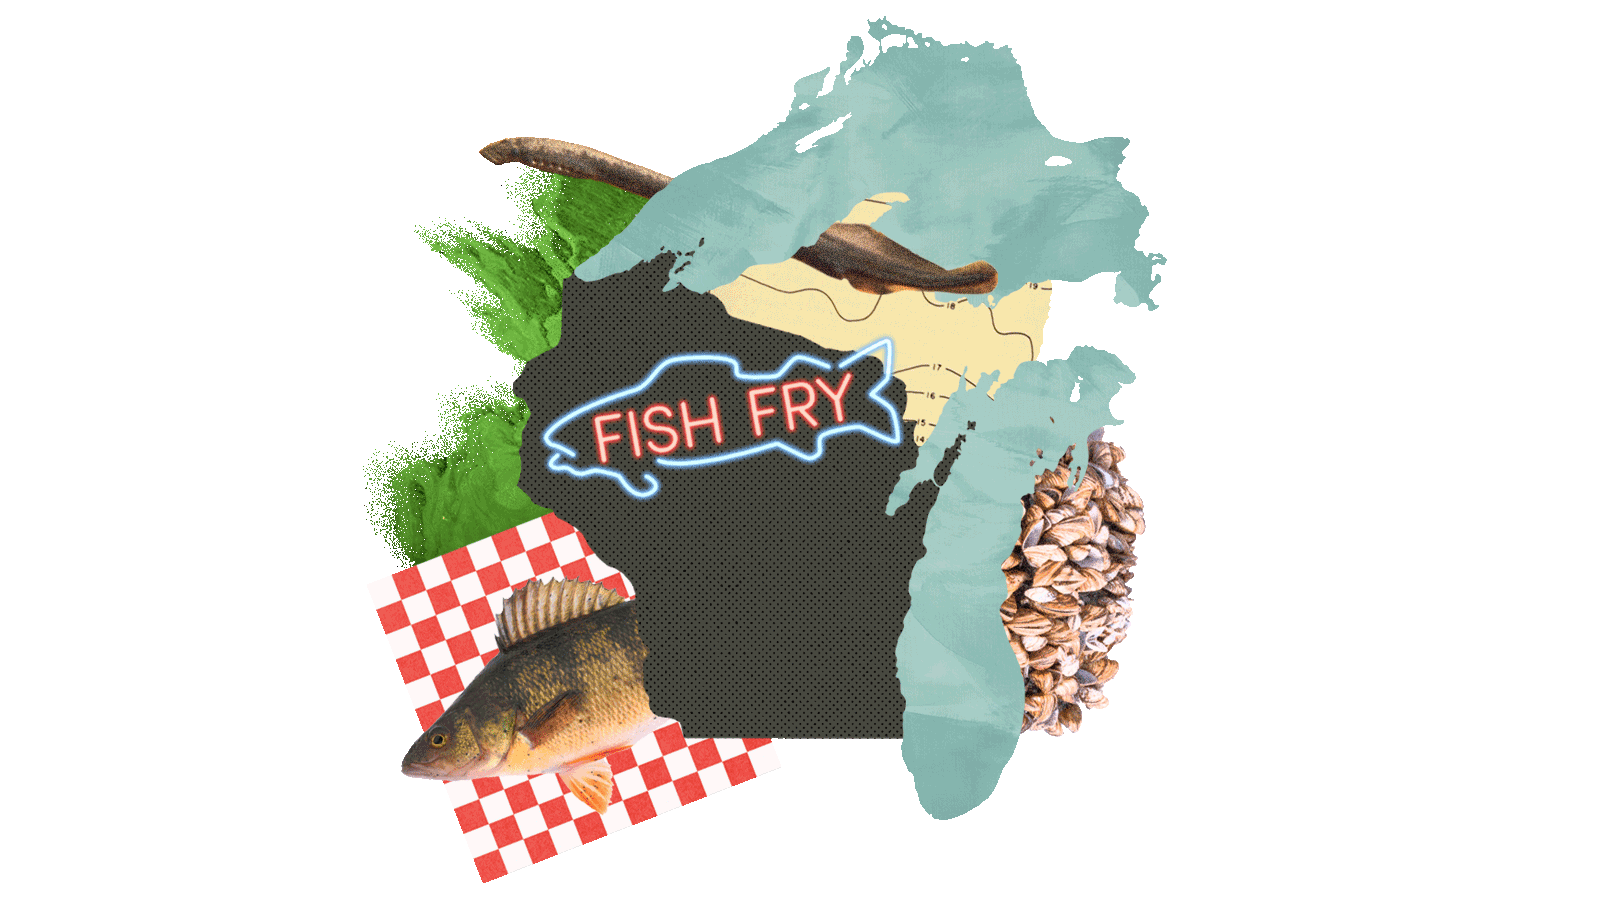 Collage: State of Wisconsin, Lake Superior, and Lake Michigan, with an algal bloom, sea lamprey, zebra mussels, a perch fish on top of red and white checked paper, and a blinking neon sign in the shape of a fish that reads 